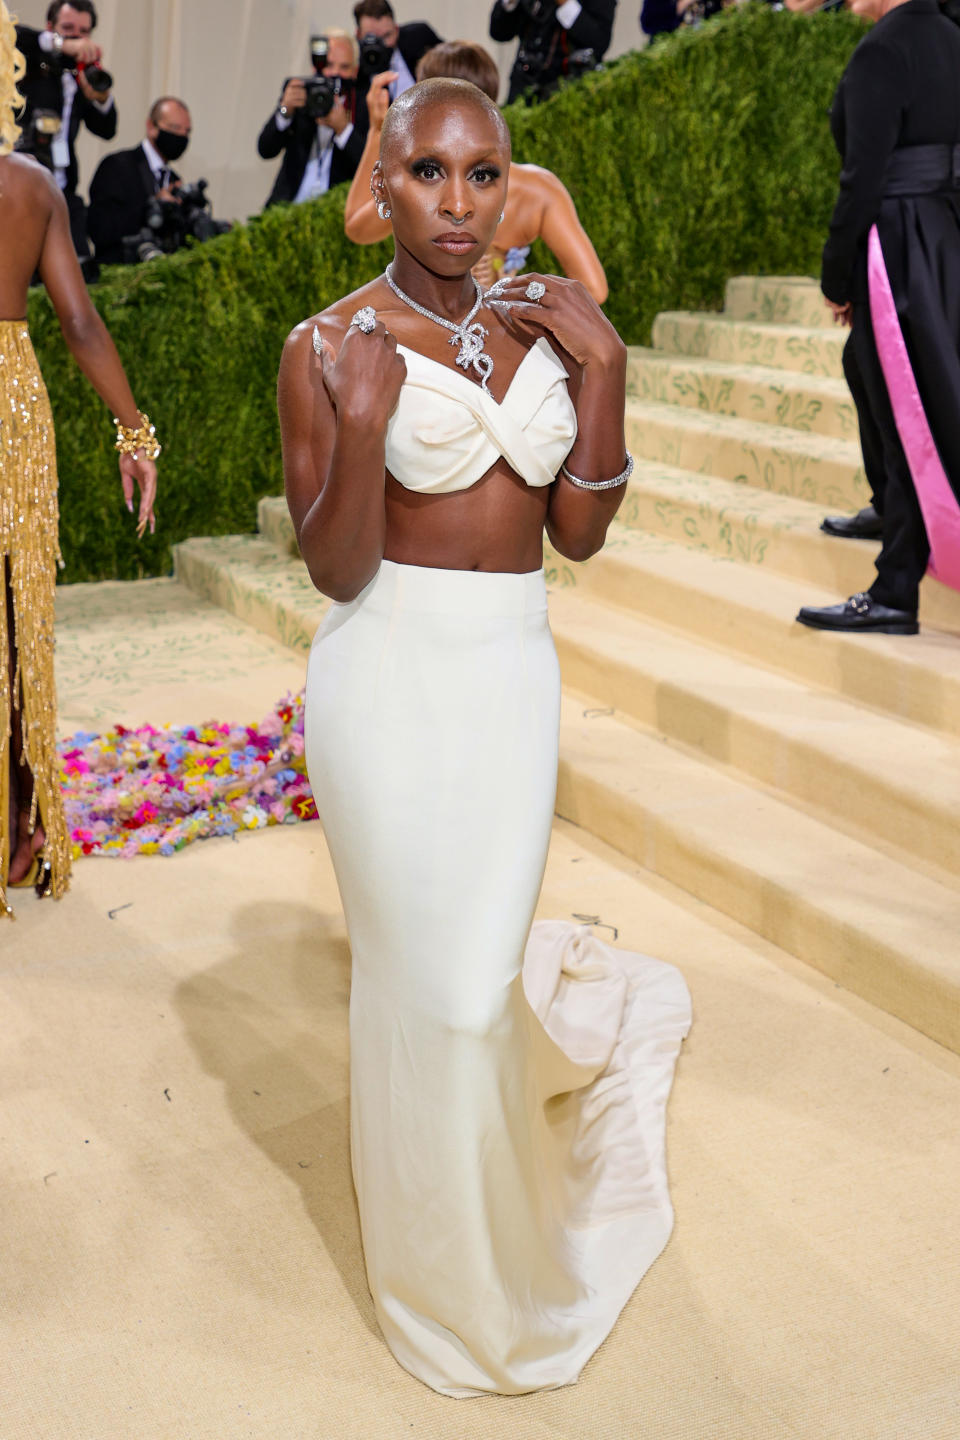 Cynthia Erivo at the 2021 Met Gala - Credit: Getty Images